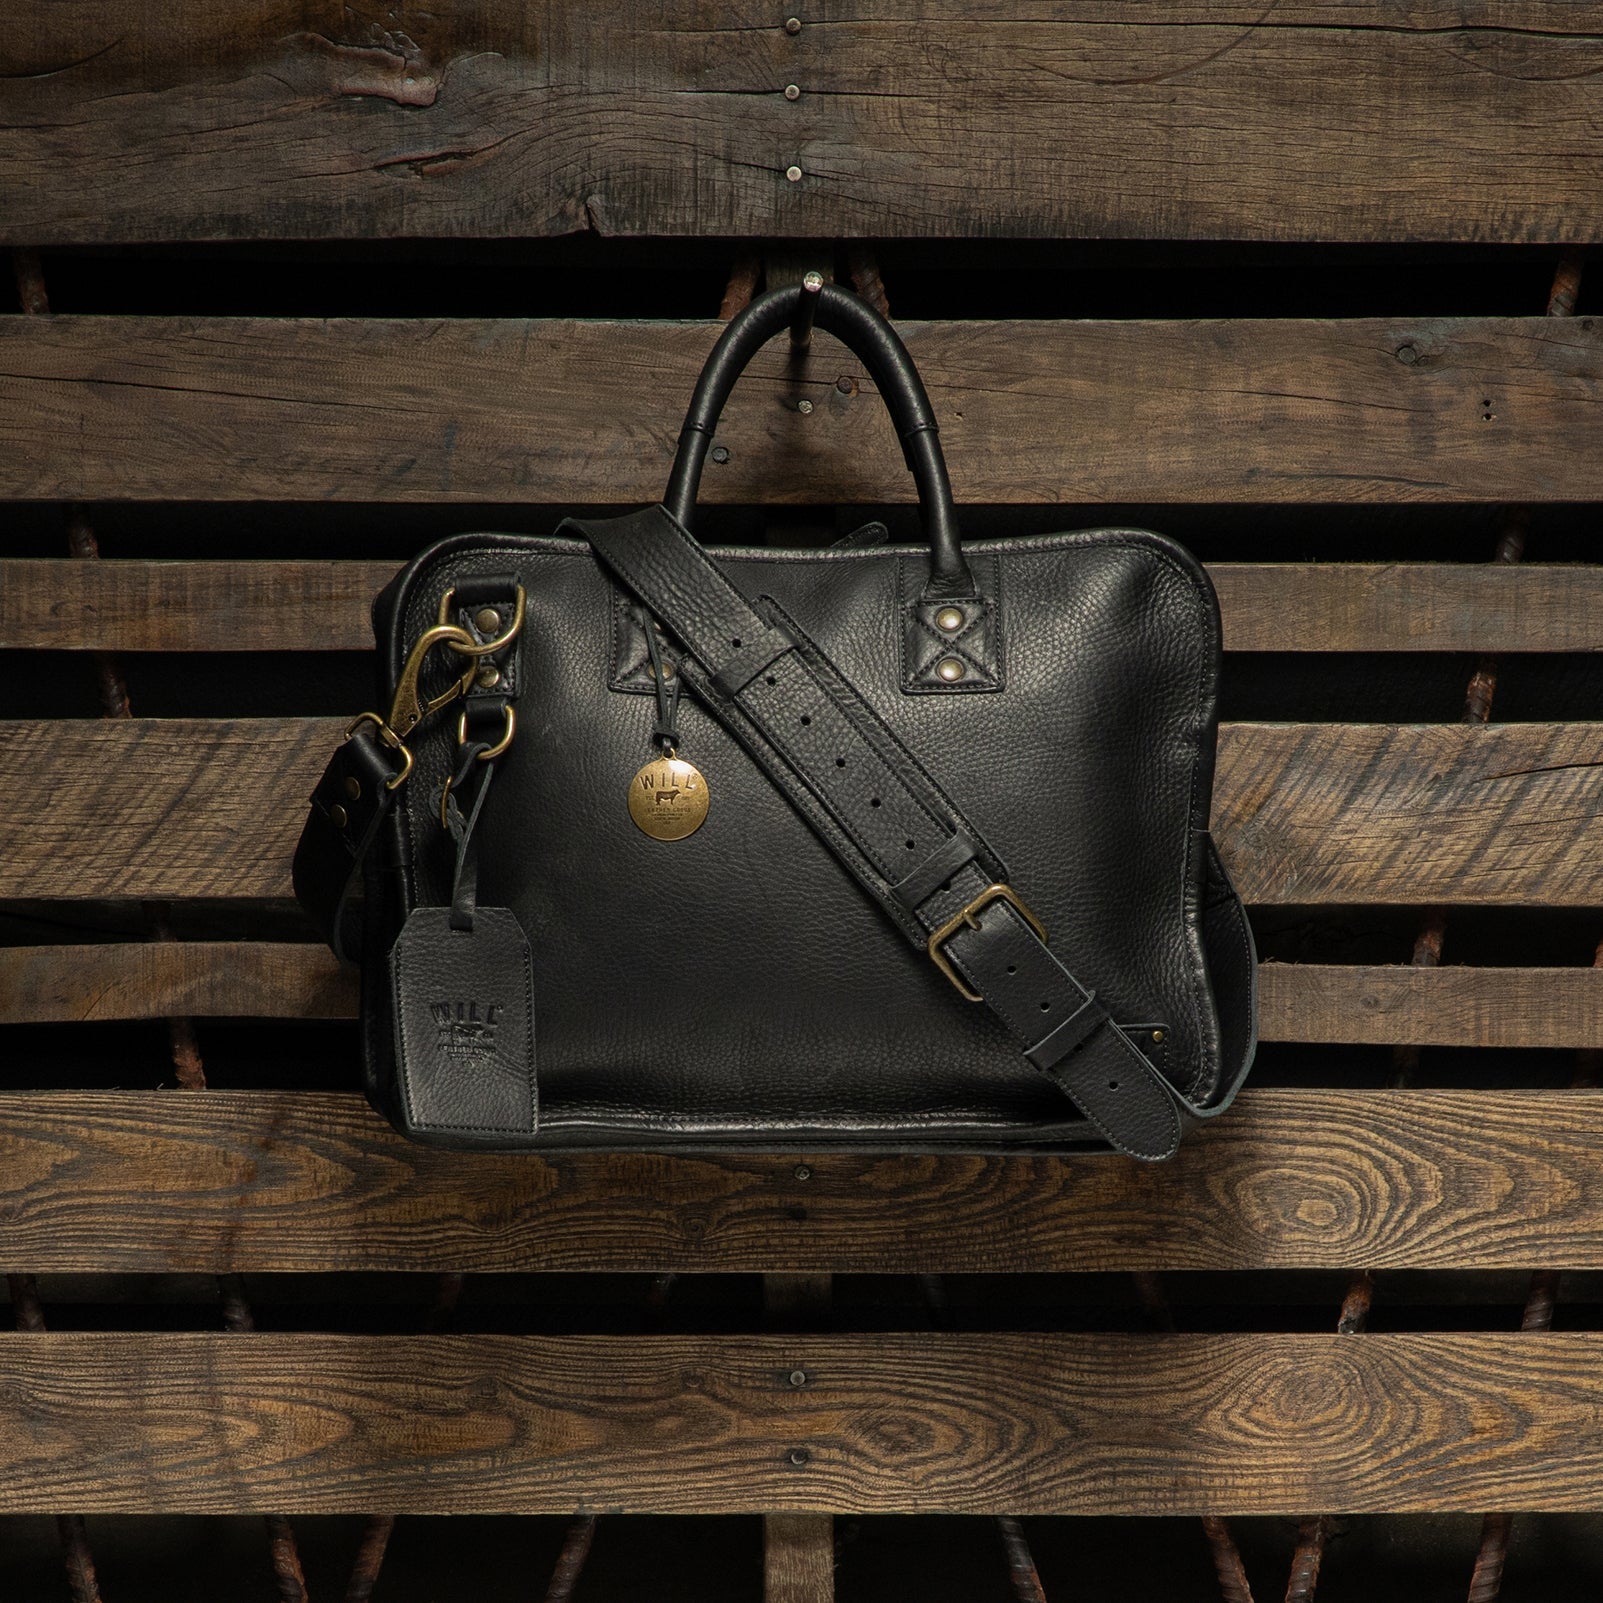 Hank Leather Satchel in Black by Will Leather Goods